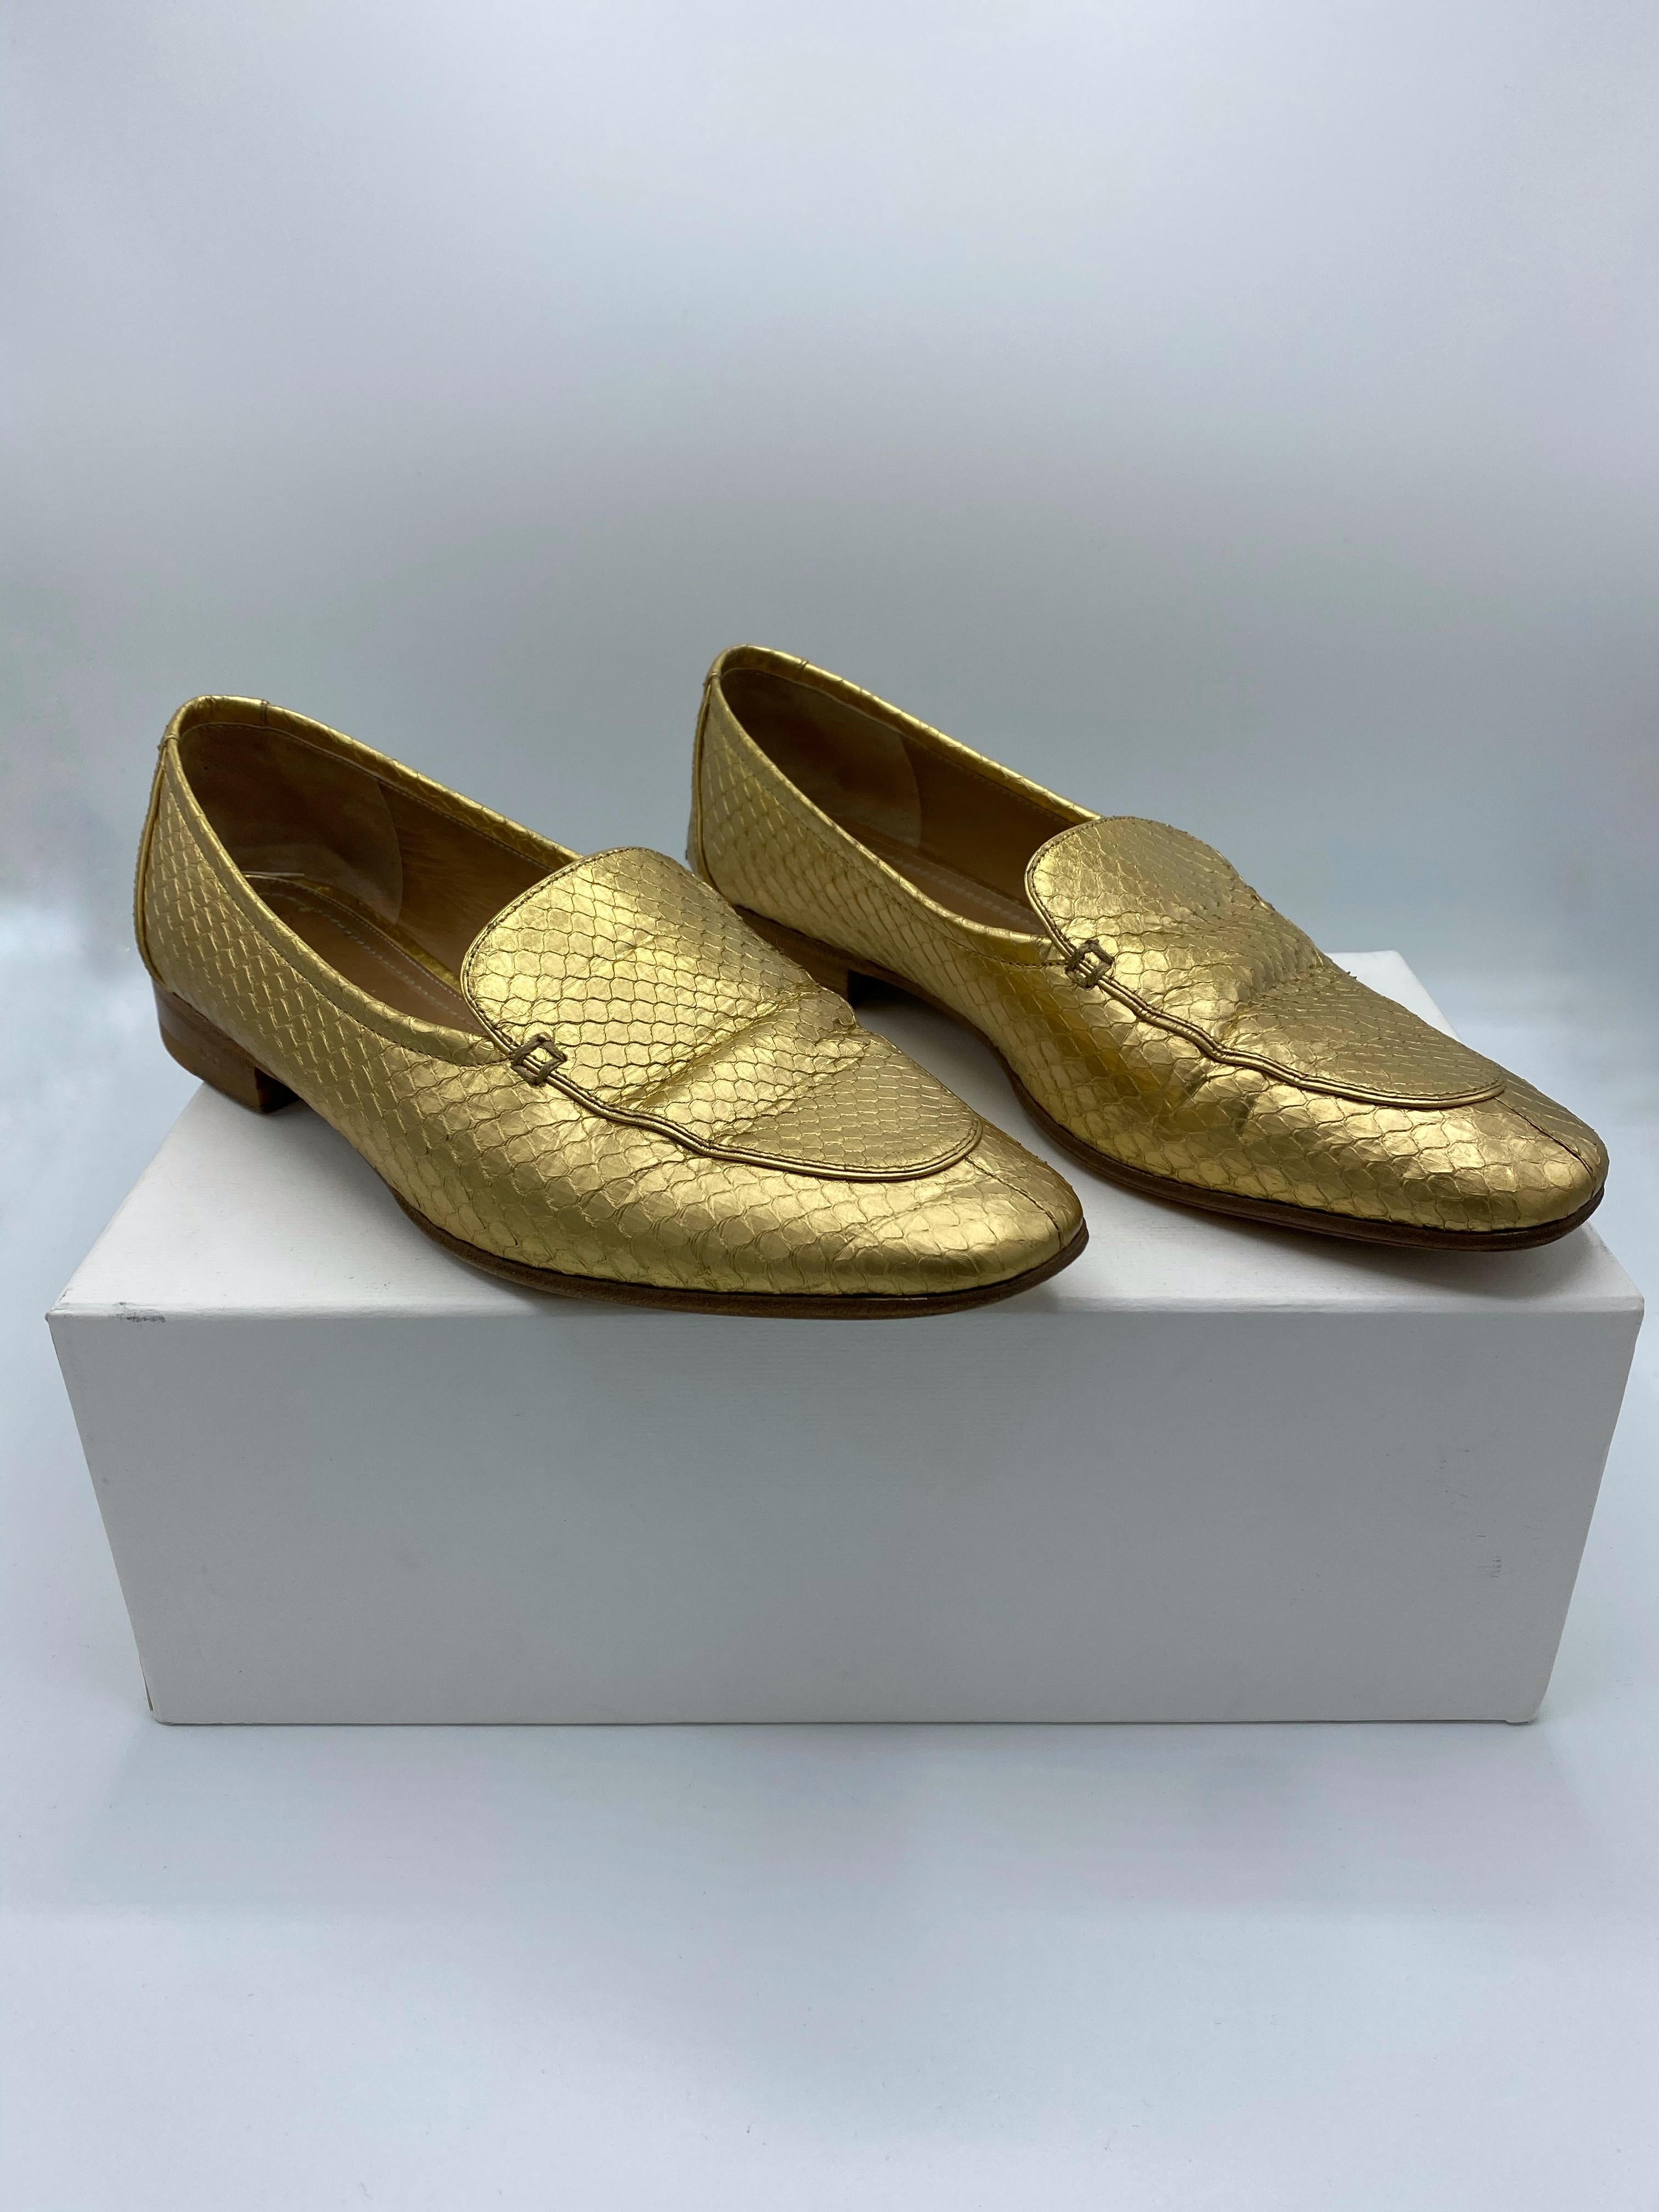 The Row Adam Mocassin Gold Watersnake Flat Shoes Size 39 For Sale 3